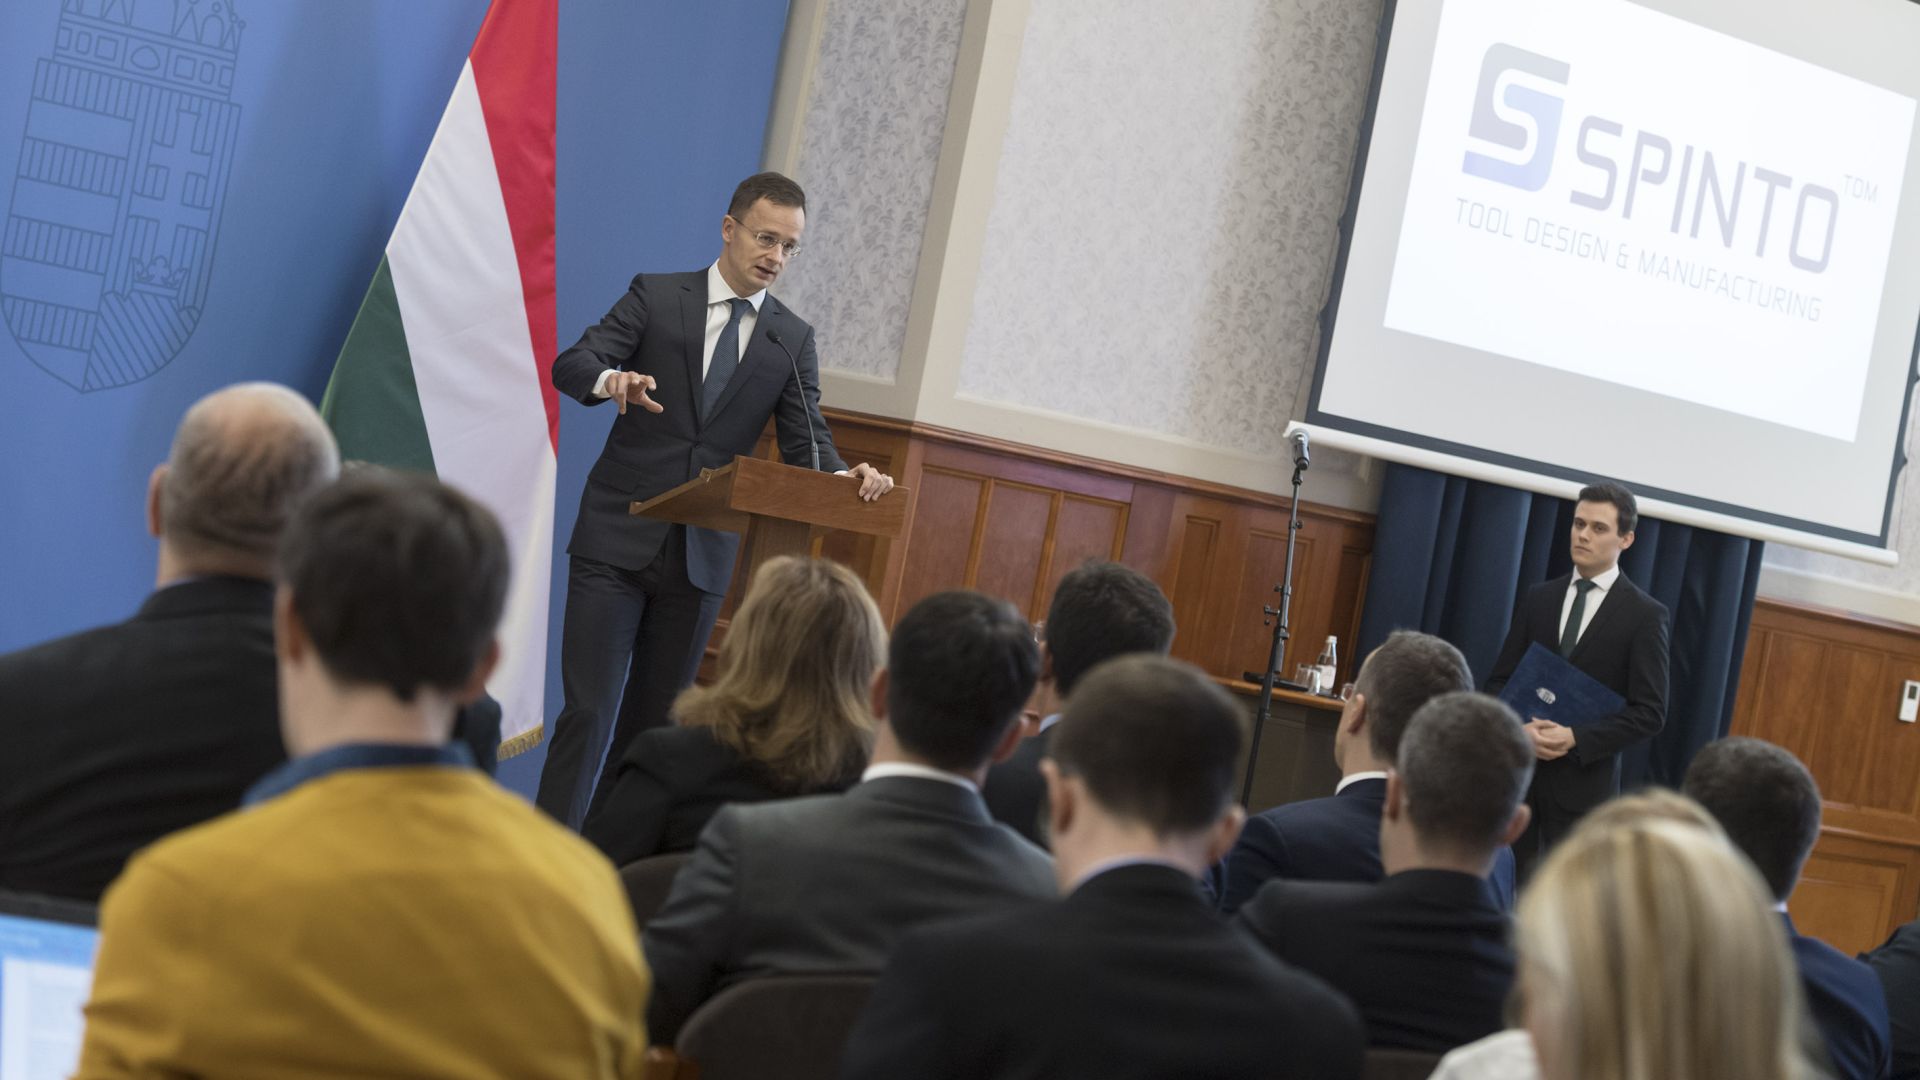 Péter Szijjártó, Minister of Foreign Affairs and Trade at the announcement of the investment